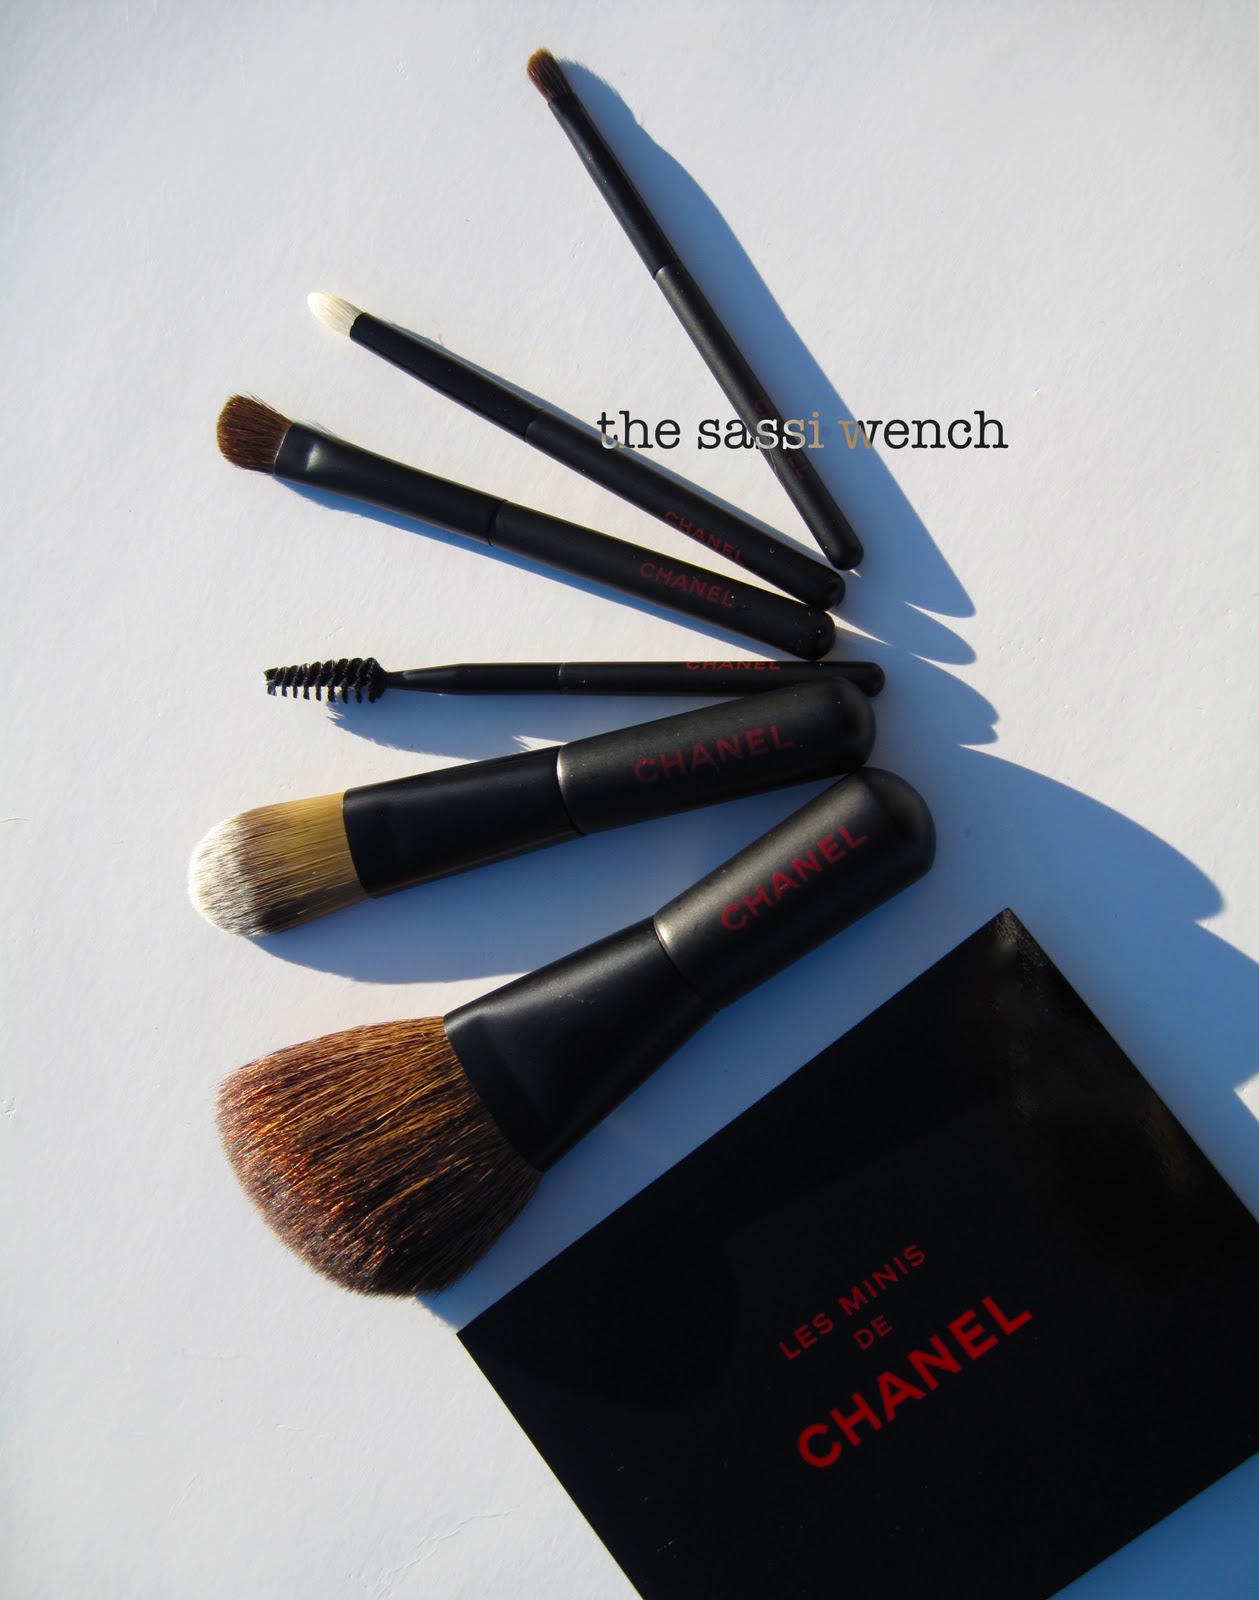 from Sassi, who lived it: Chanel Holiday 2011 Makeup Brush Set